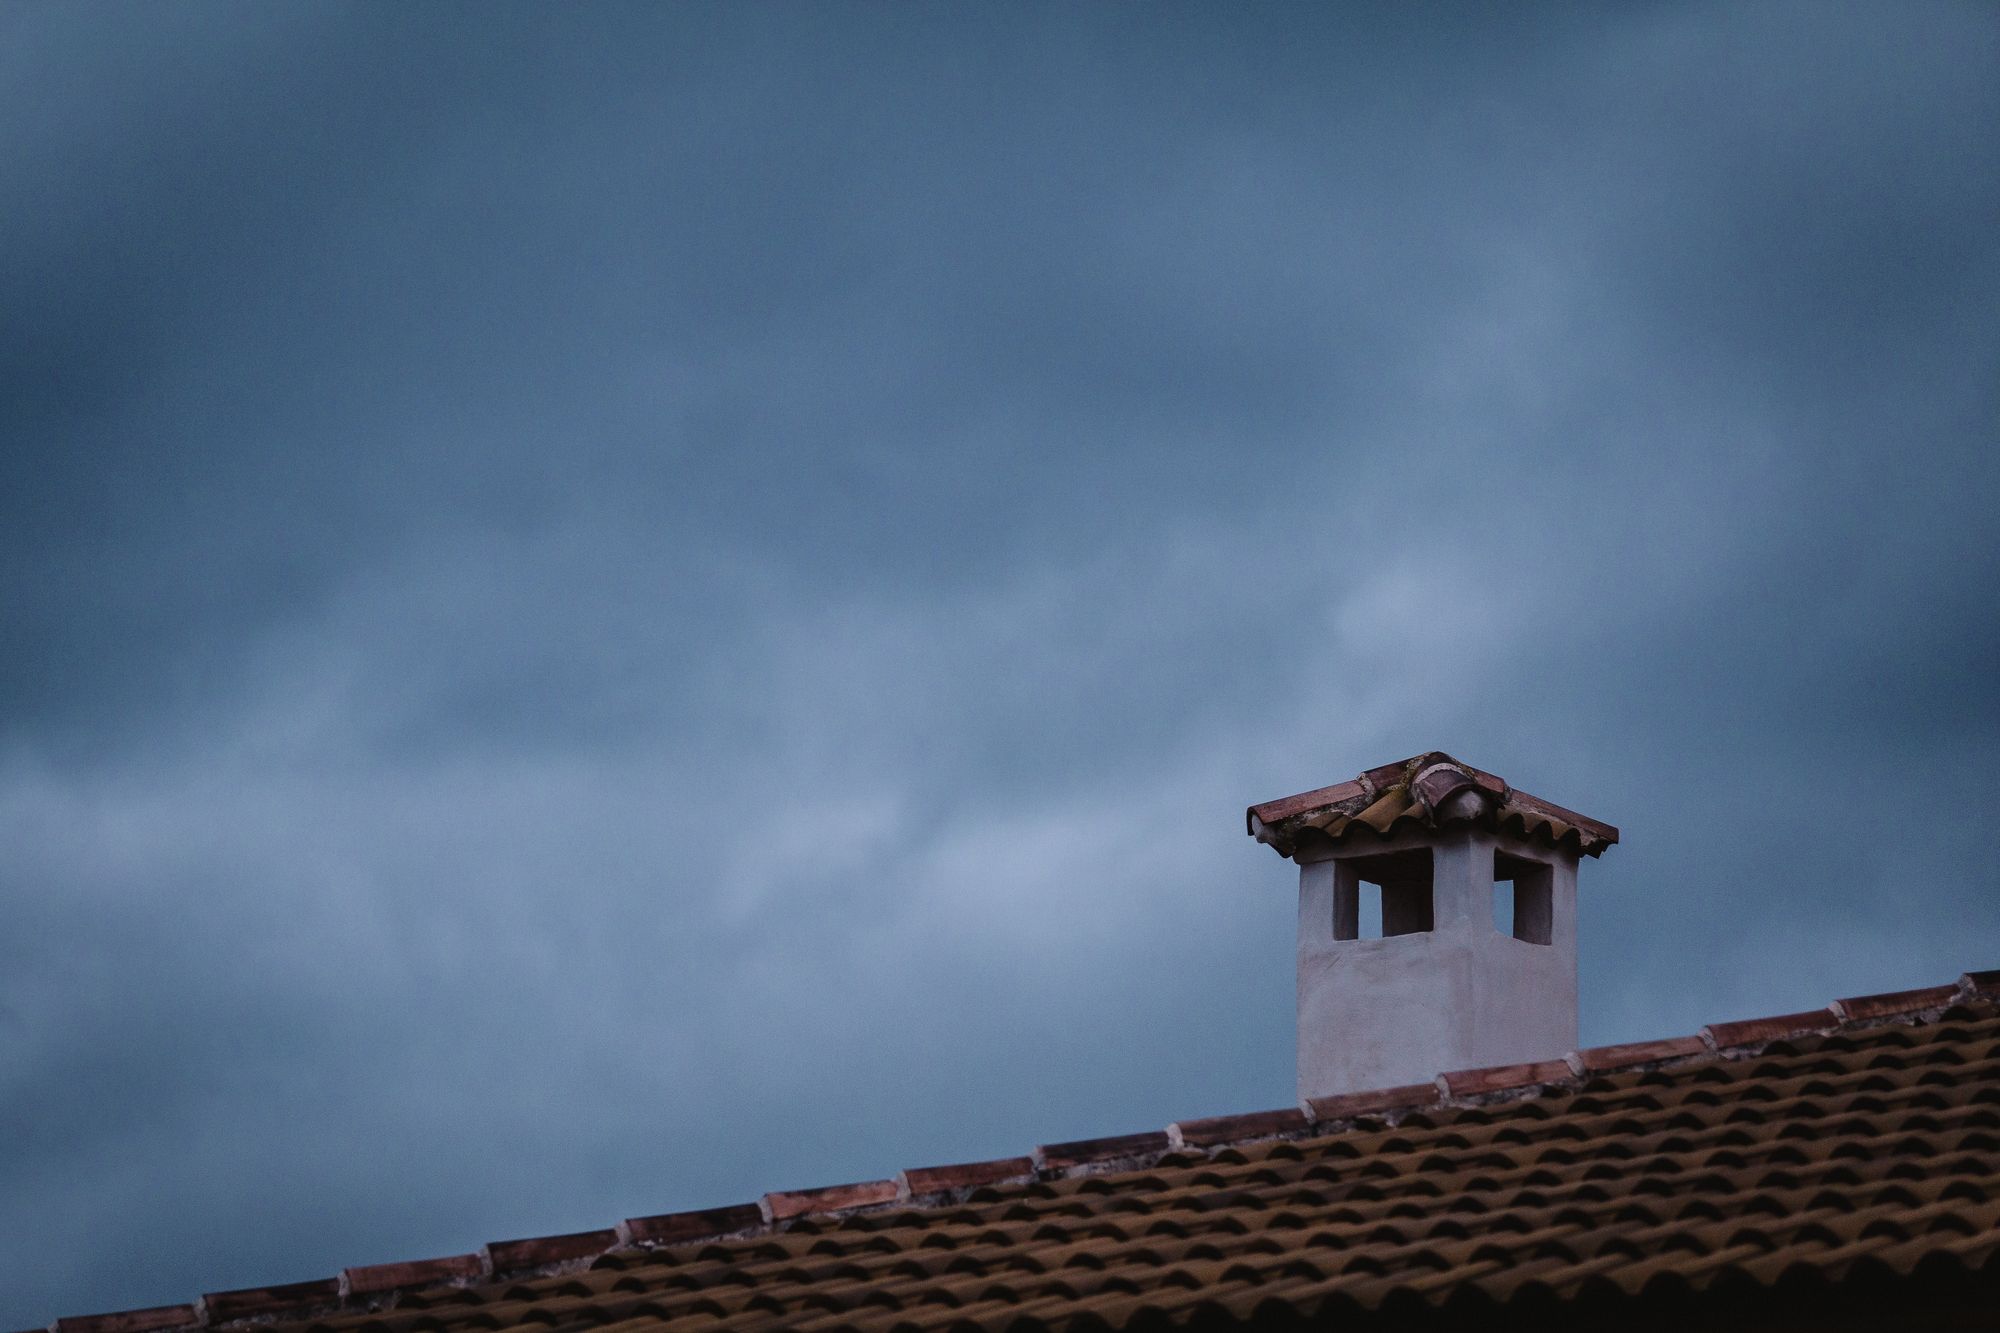 Chimney Cleaning: Protect Your Home and Health